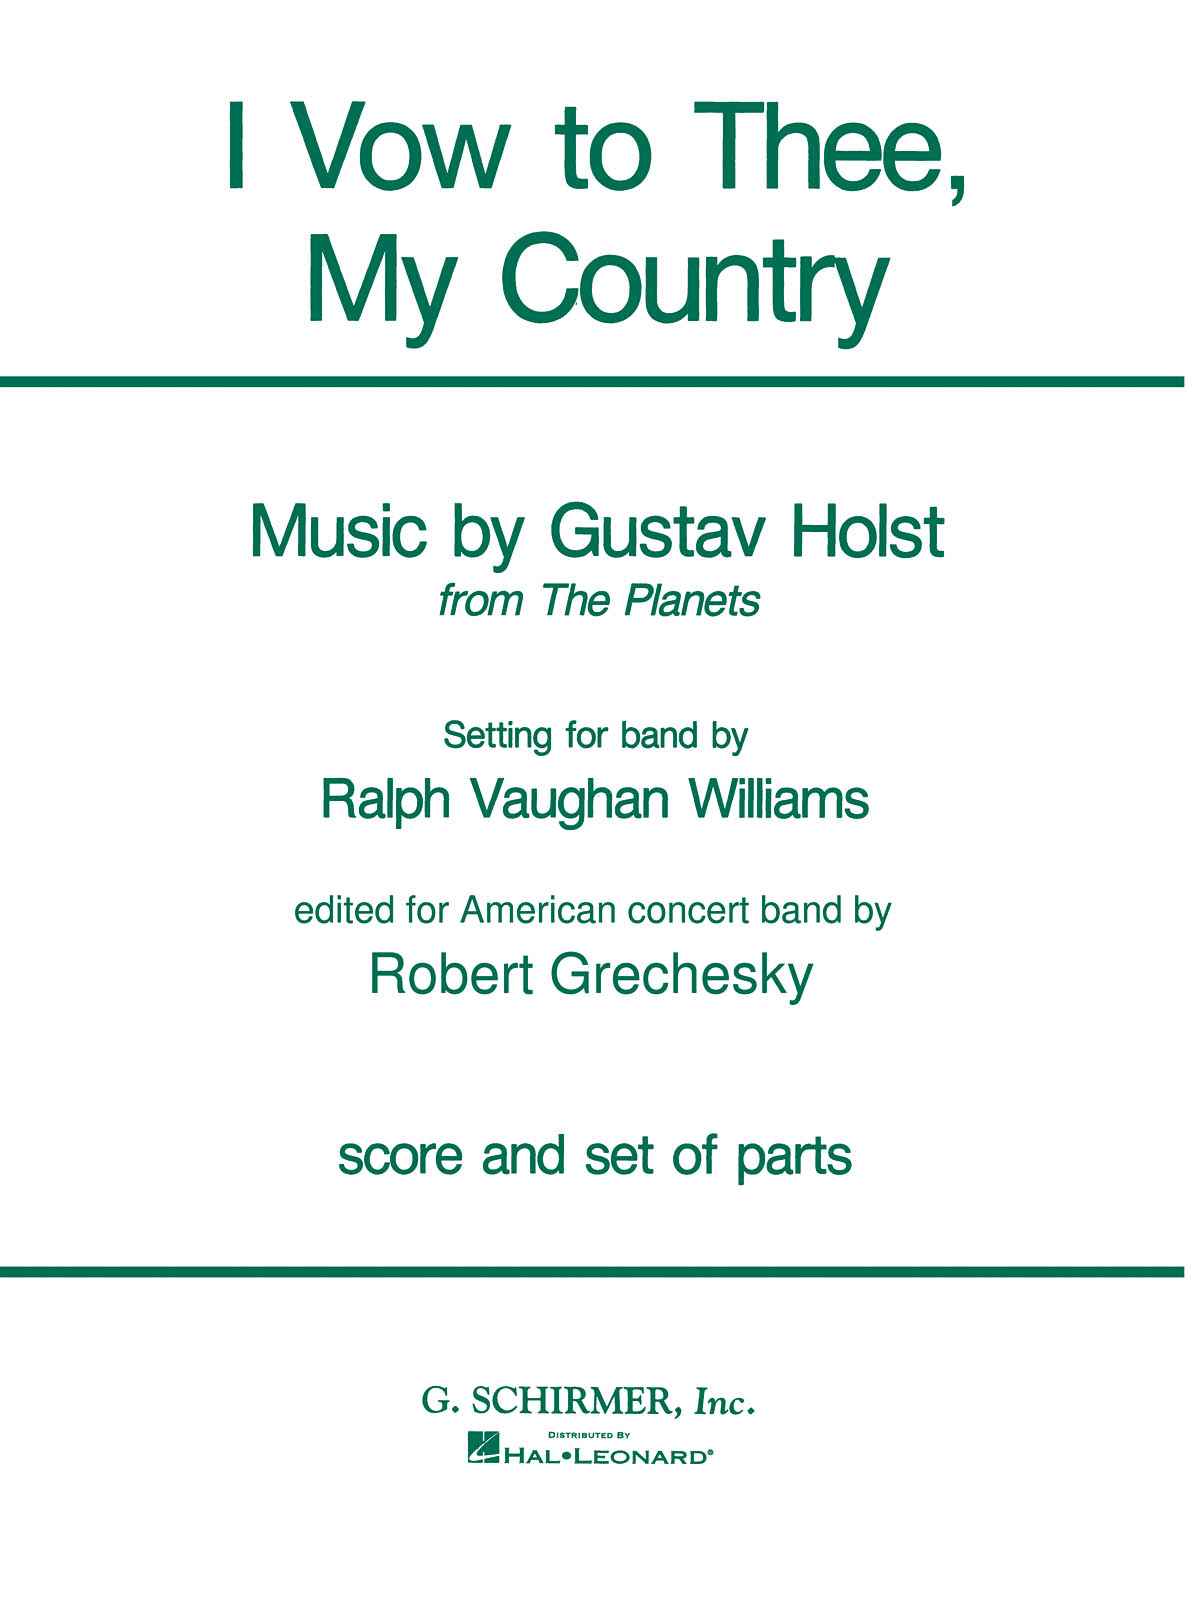 Gustav Holst: I Vow To Thee My Country (Score/Parts)